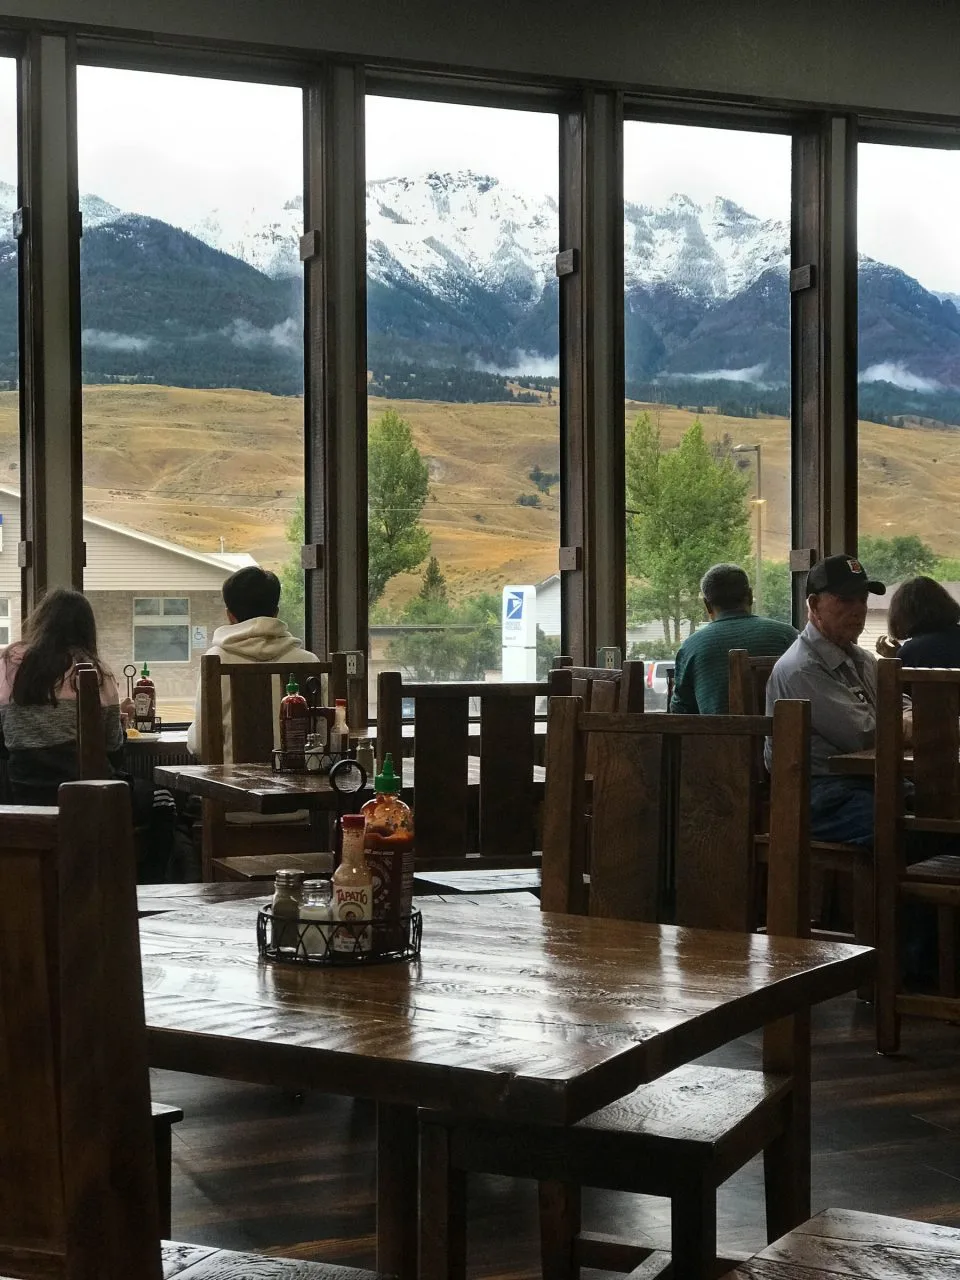 The breakfast dining room at the Gardiner MT Super 8 Hotel with a beautiful view of the hills and snowcapped mountains.